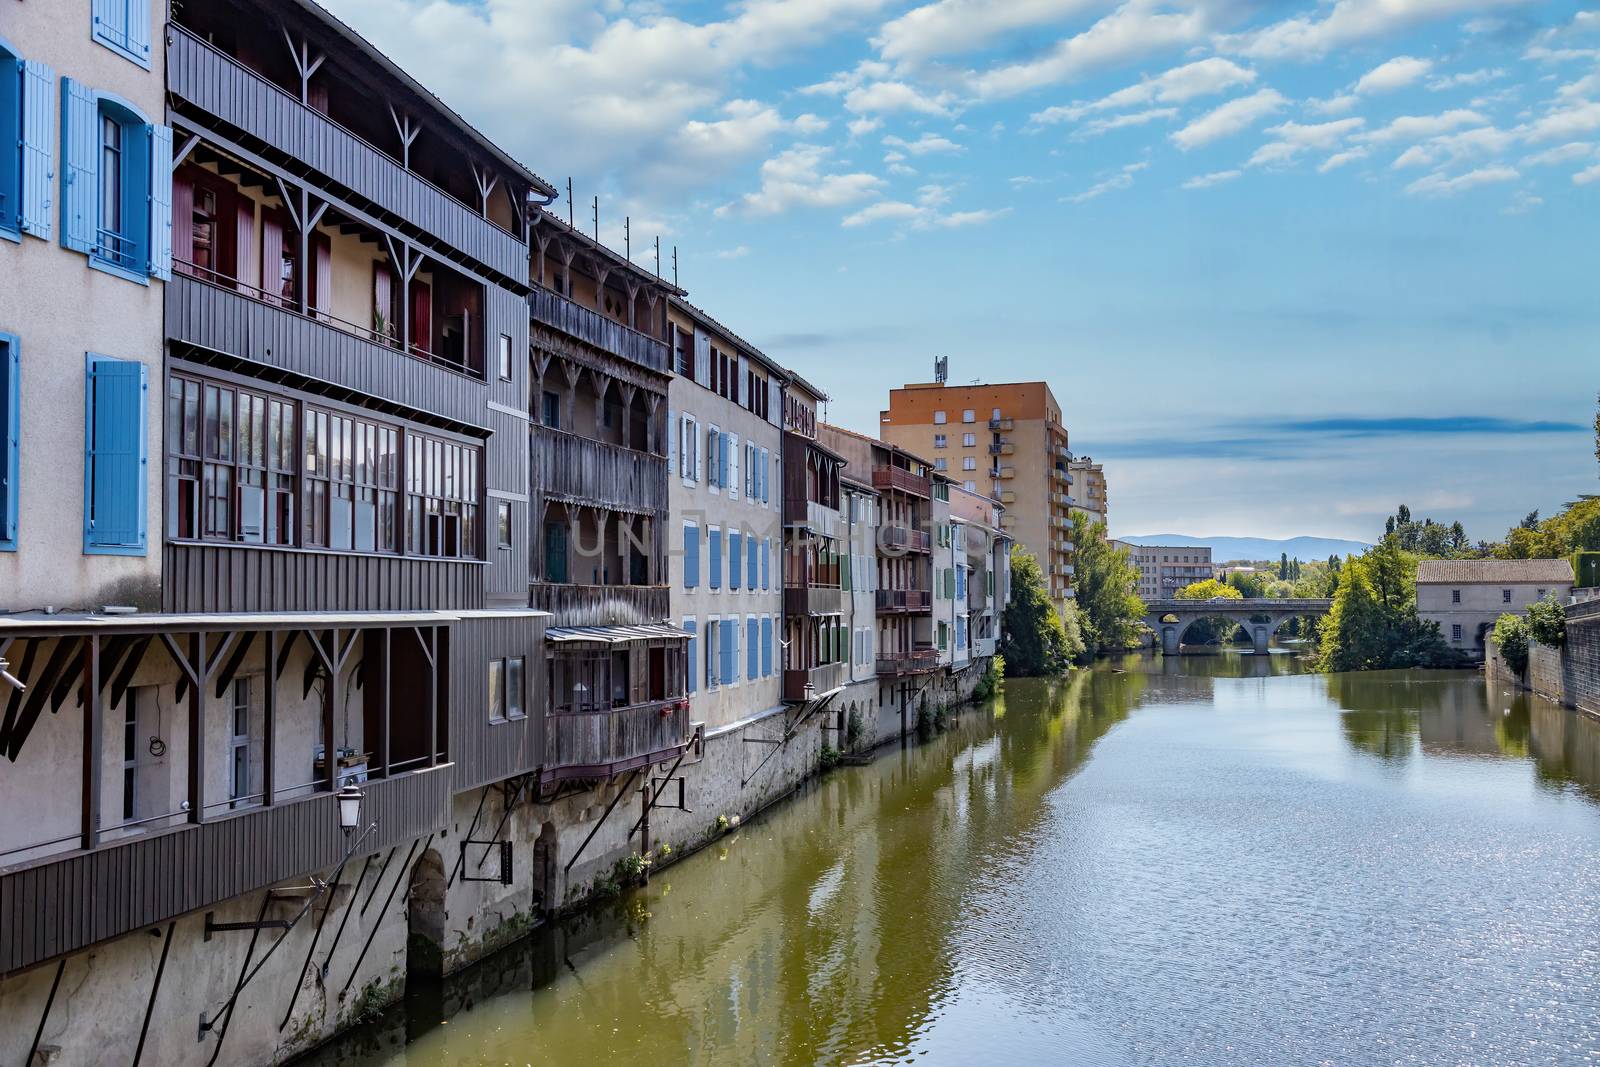 Nice buildings on the river Tarn in French town Castres. by Digoarpi